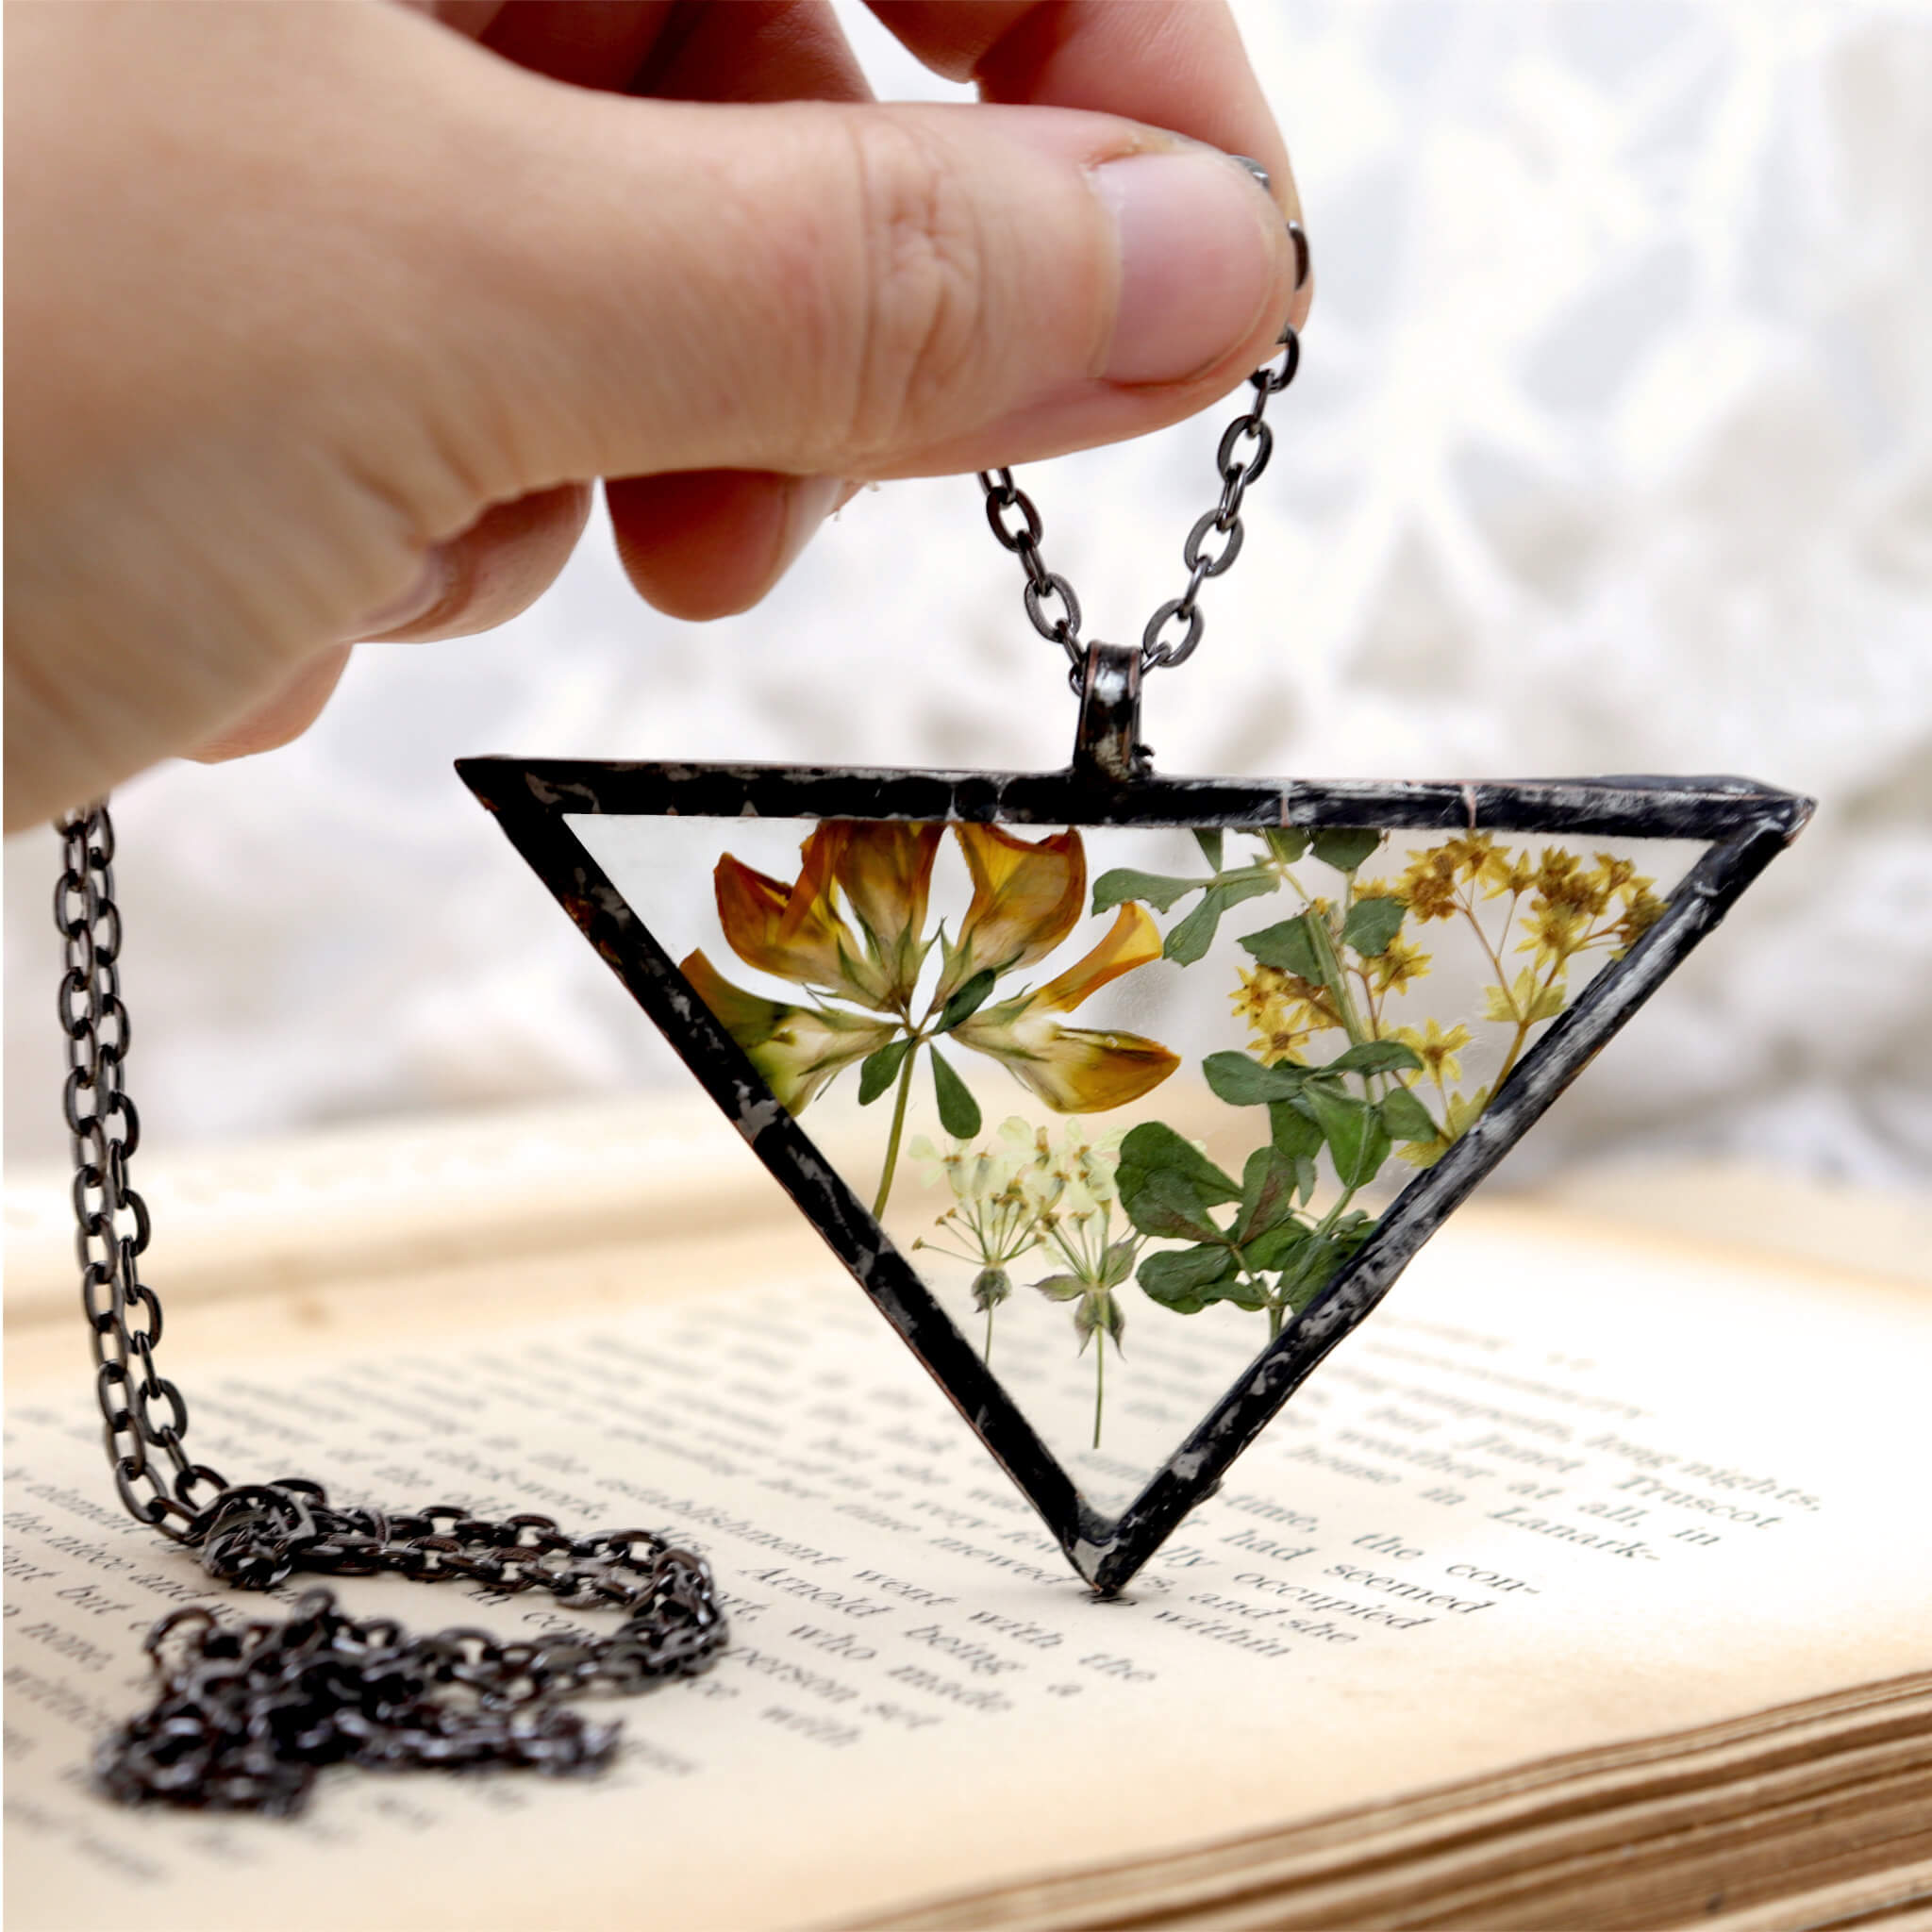 Necklace of a mix of pressed flowers in triangular soldered glass